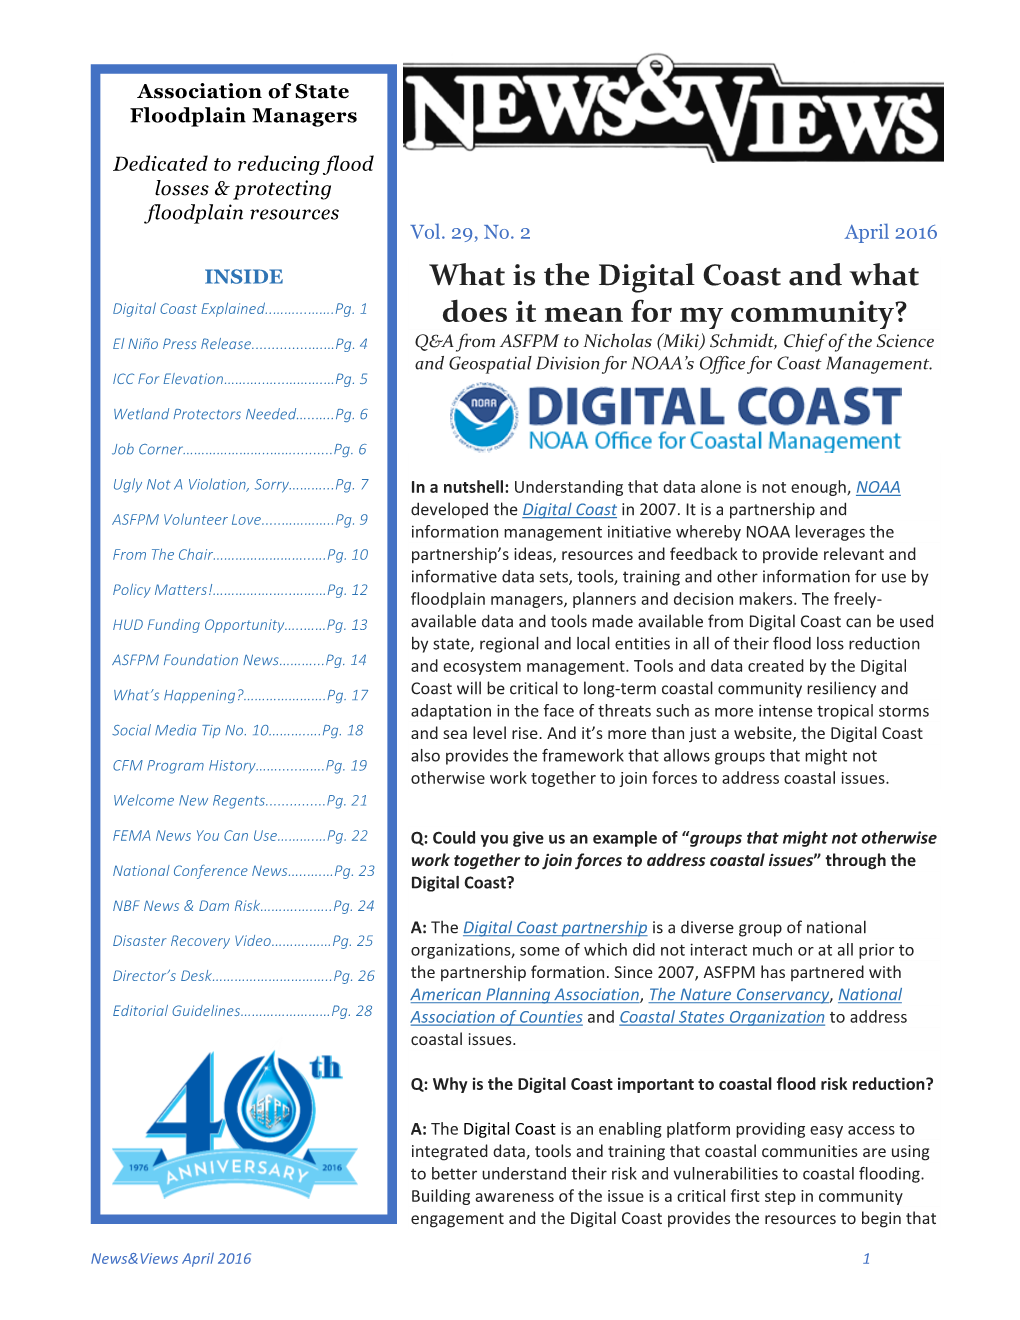 What Is the Digital Coast and What Does It Mean for My Community?